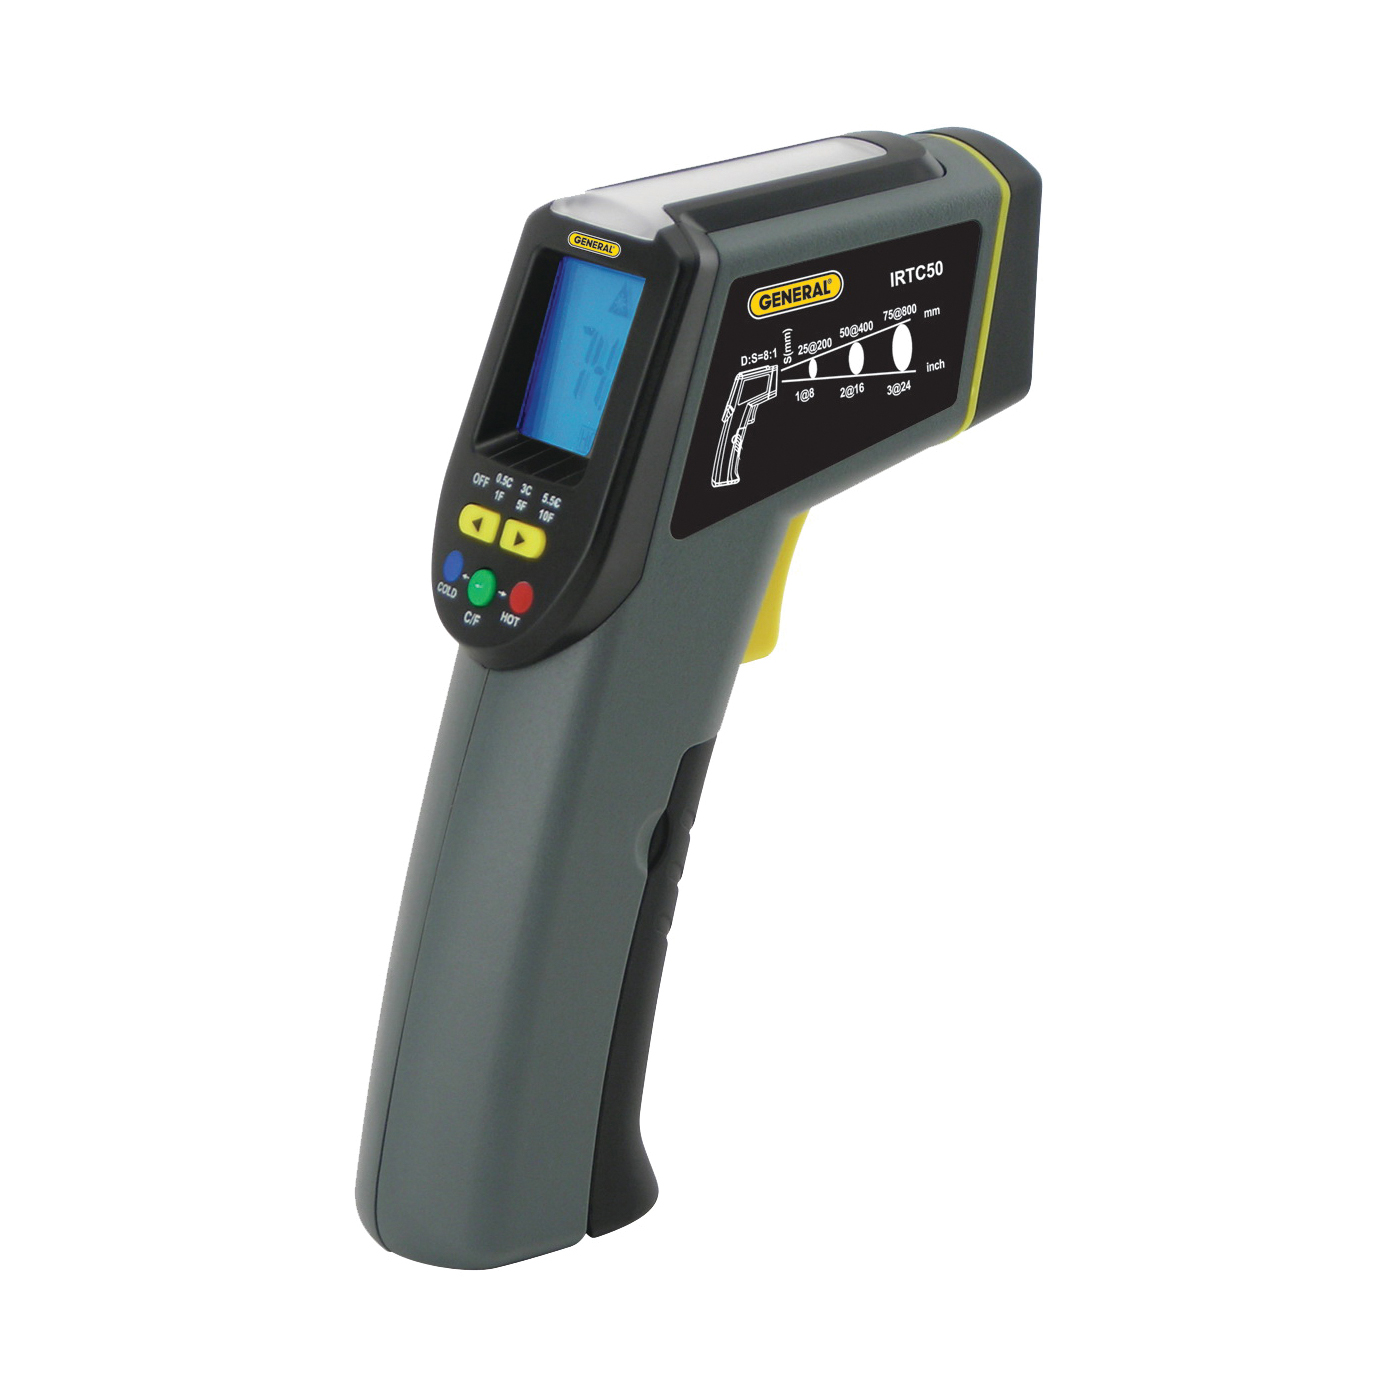 GENERAL IRTC50 Infrared Thermometer with Tricolor Light Panel, -40 to 428 deg F, 0.1 deg Resolution, LCD Display - 1